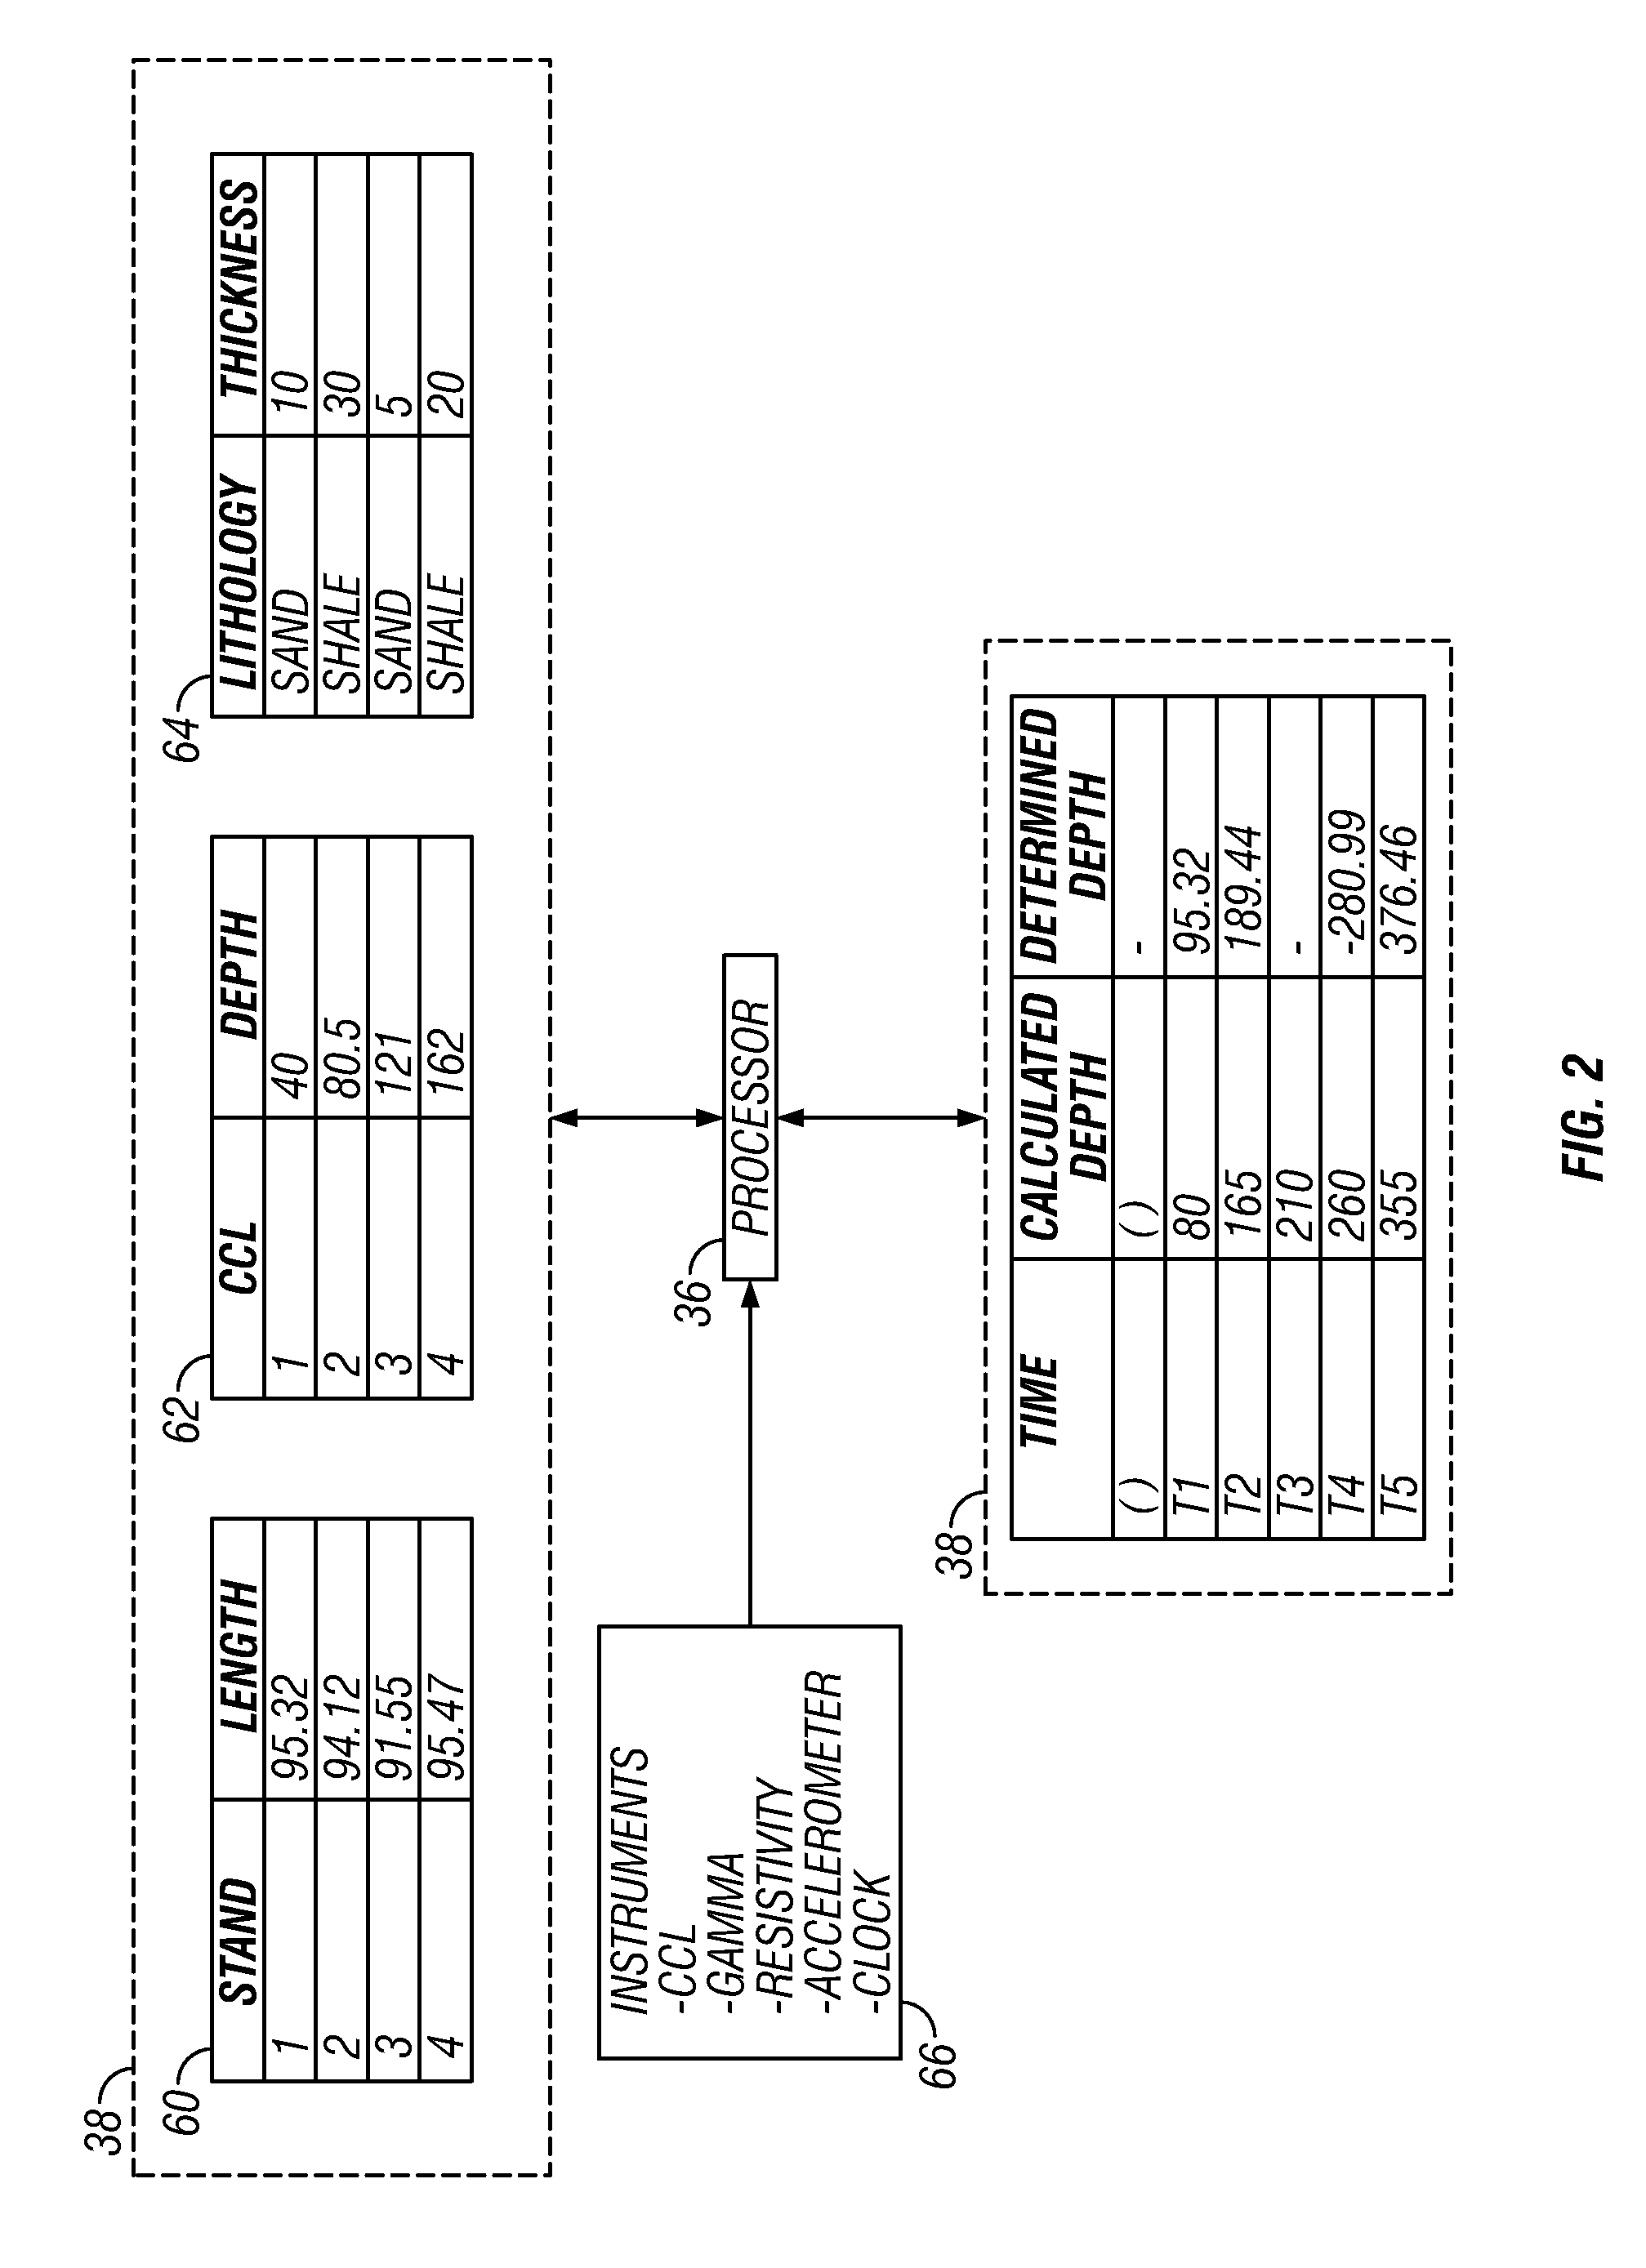 Downhole Depth Computation Methods and Related System